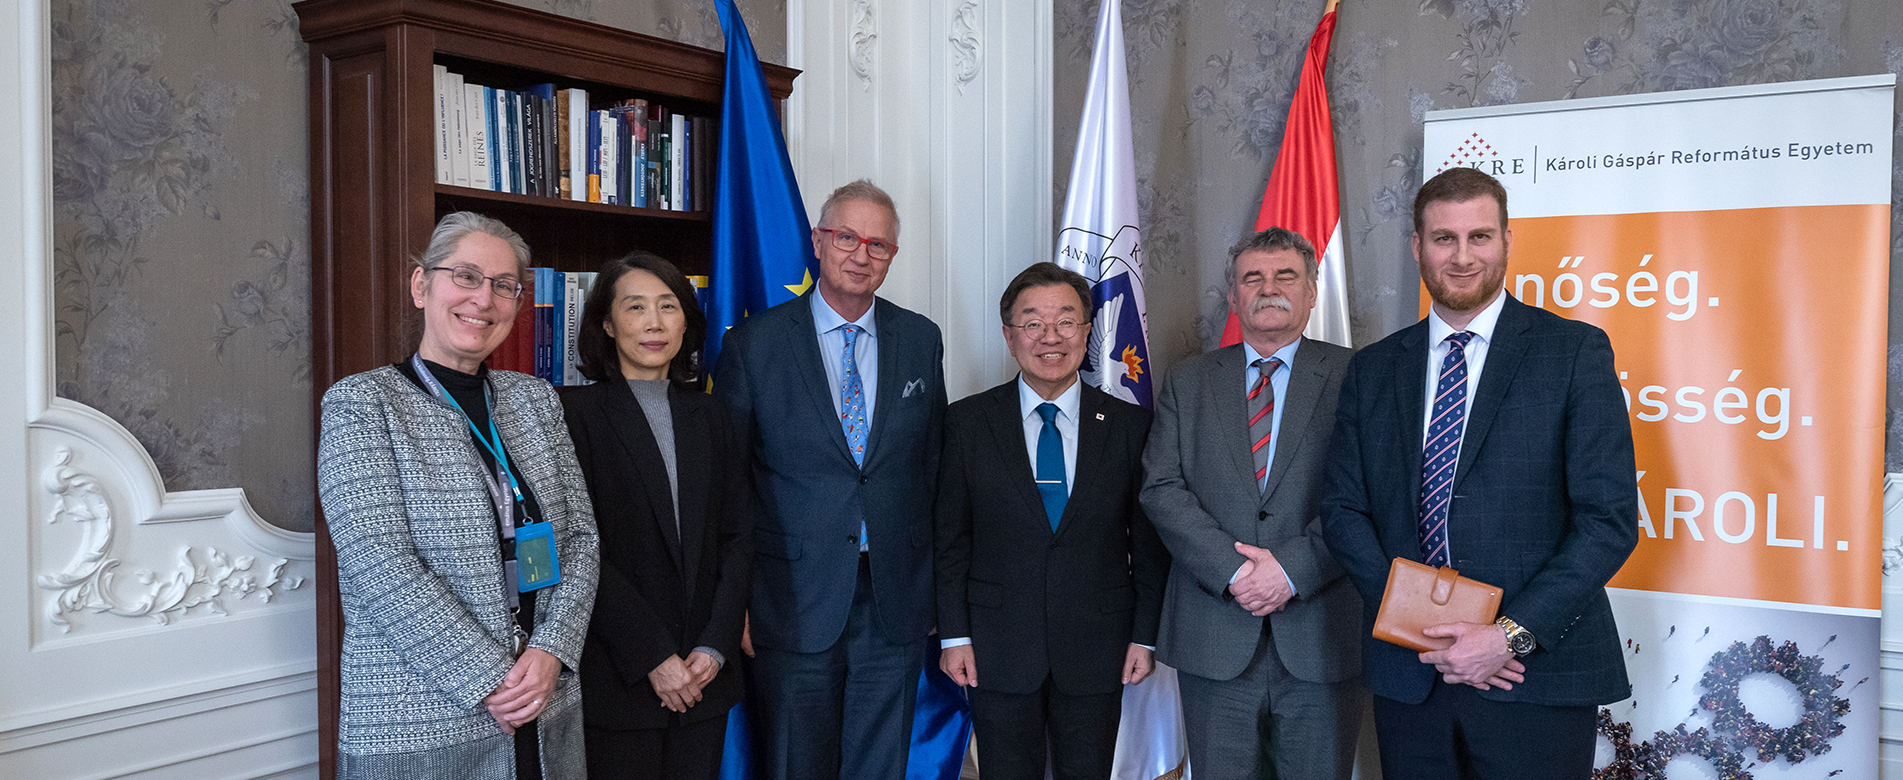 Introductory visit of His Excellency Hong Kyu Dok to our University